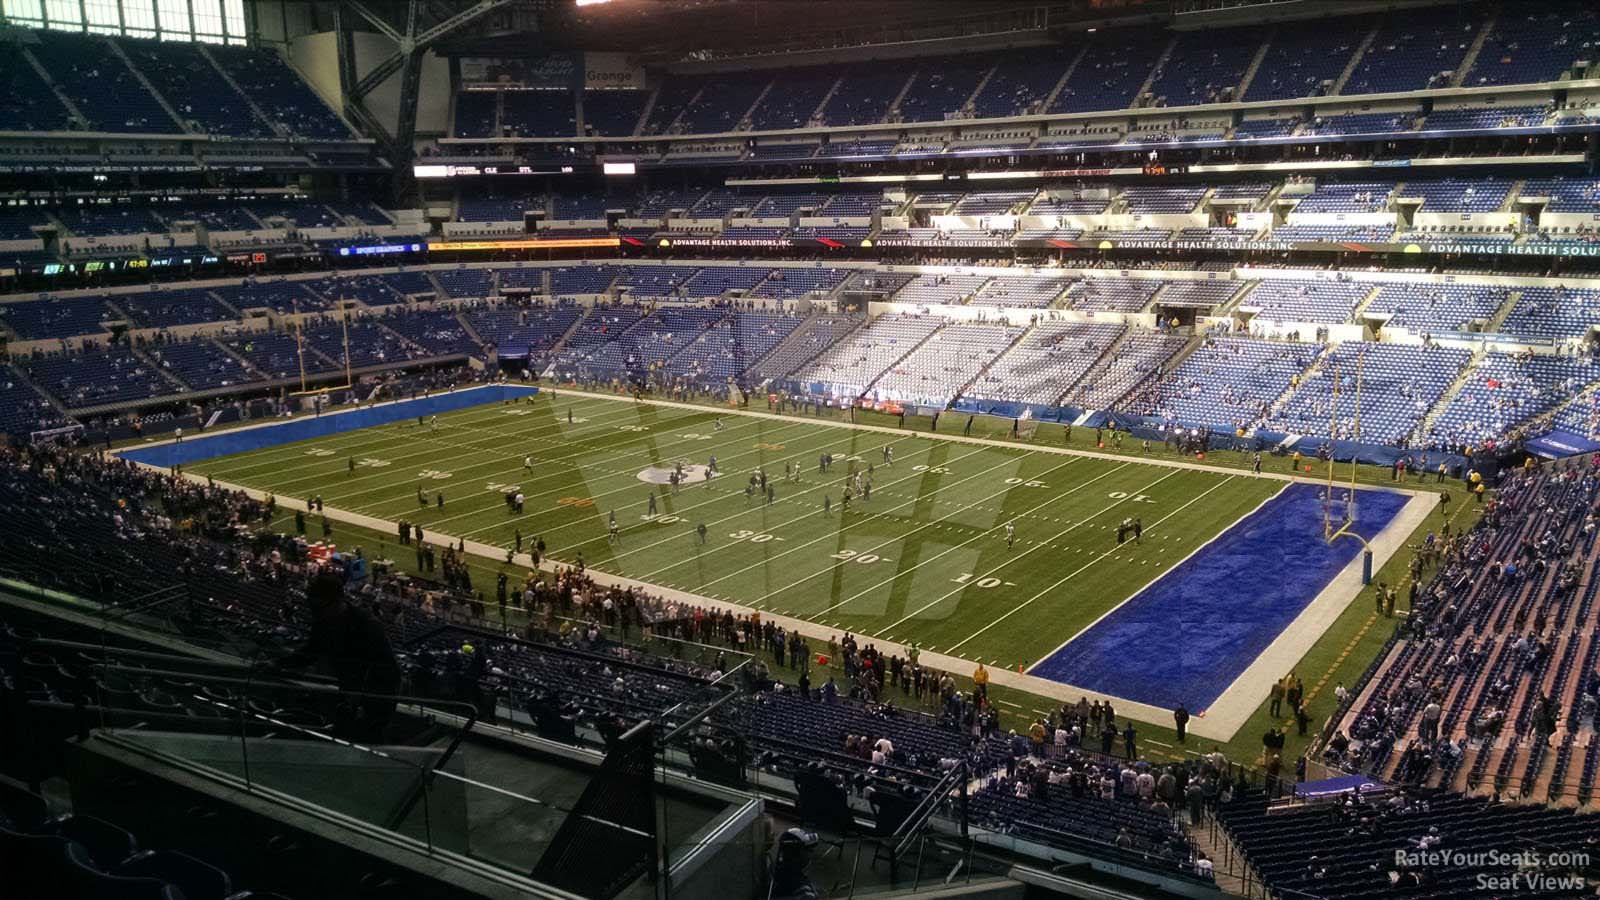 section 407, row 8 seat view  for football - lucas oil stadium